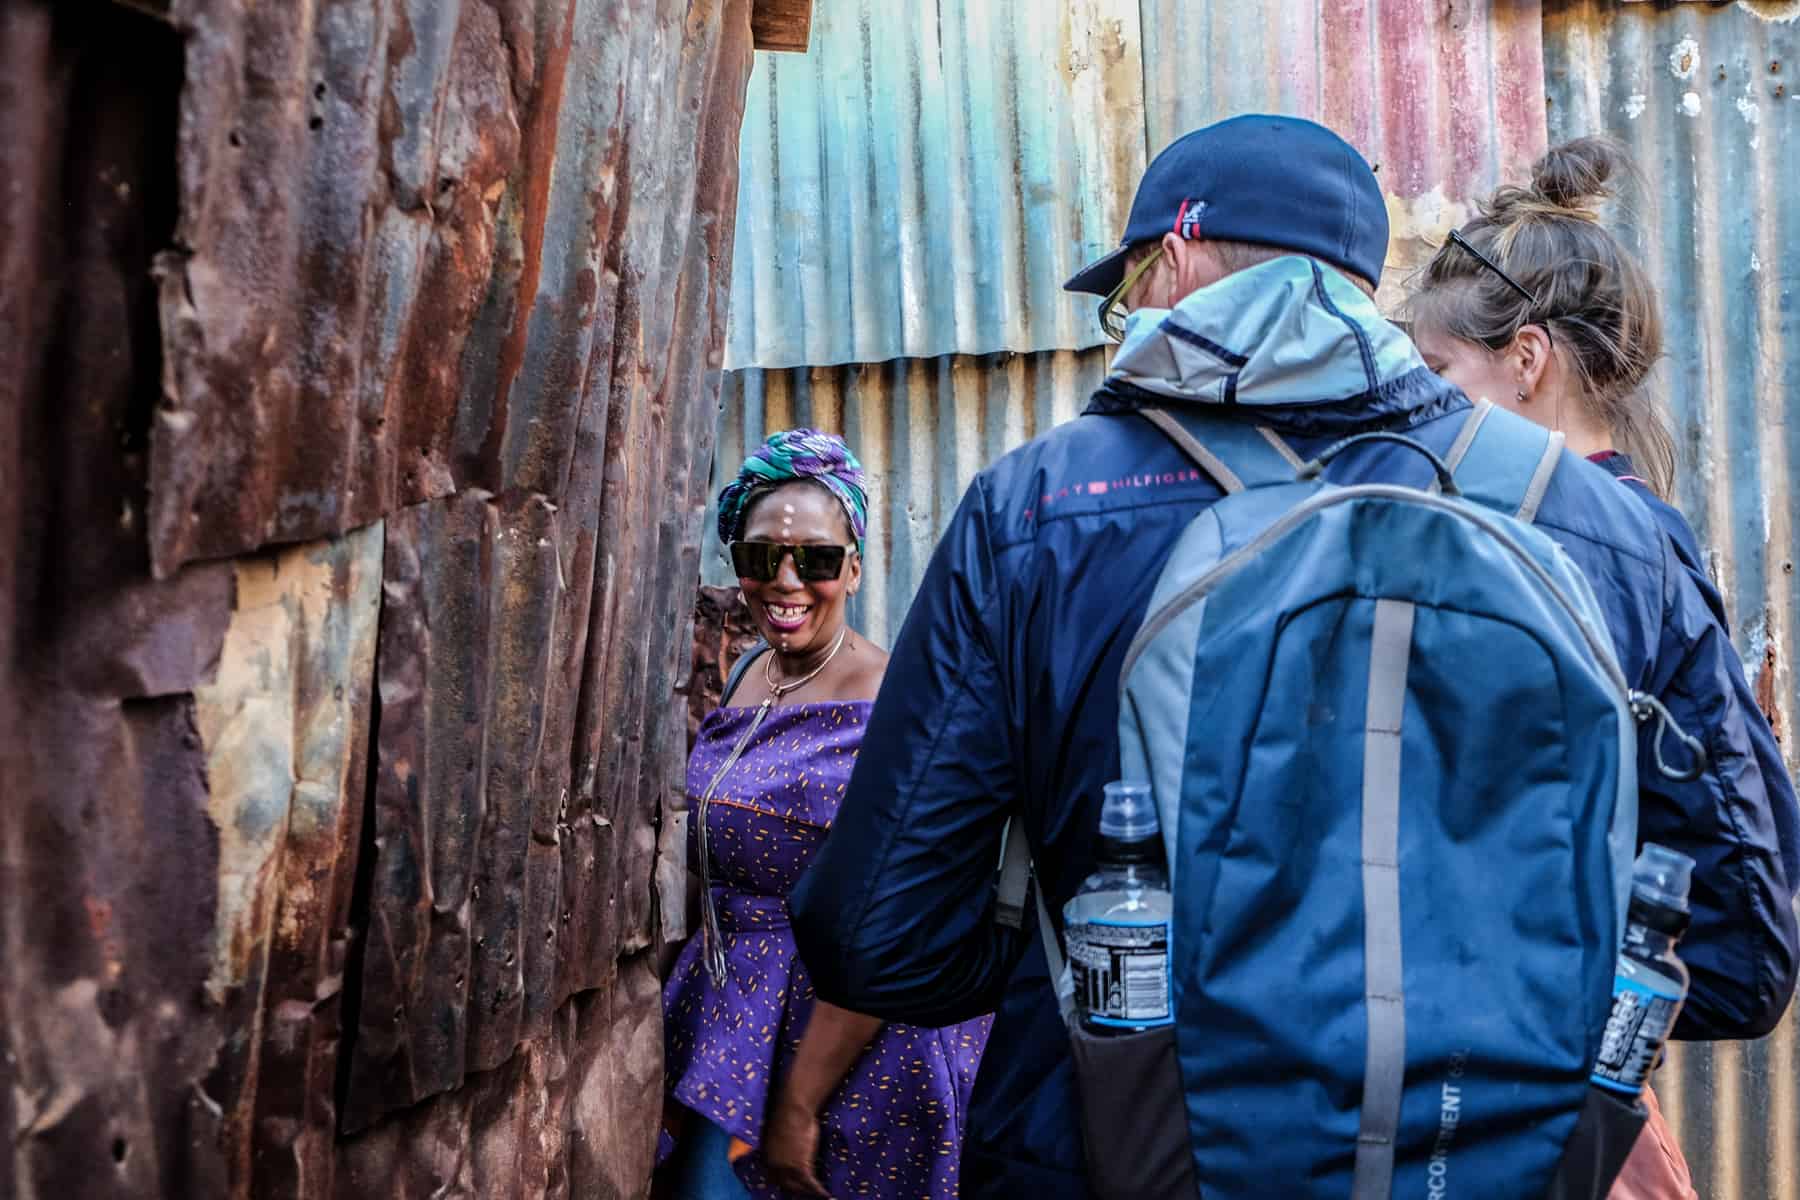 A woman in a purple dress guides a woman in blue through a narrow corridor between houses made of corrugated iron, in a township in South Africa.